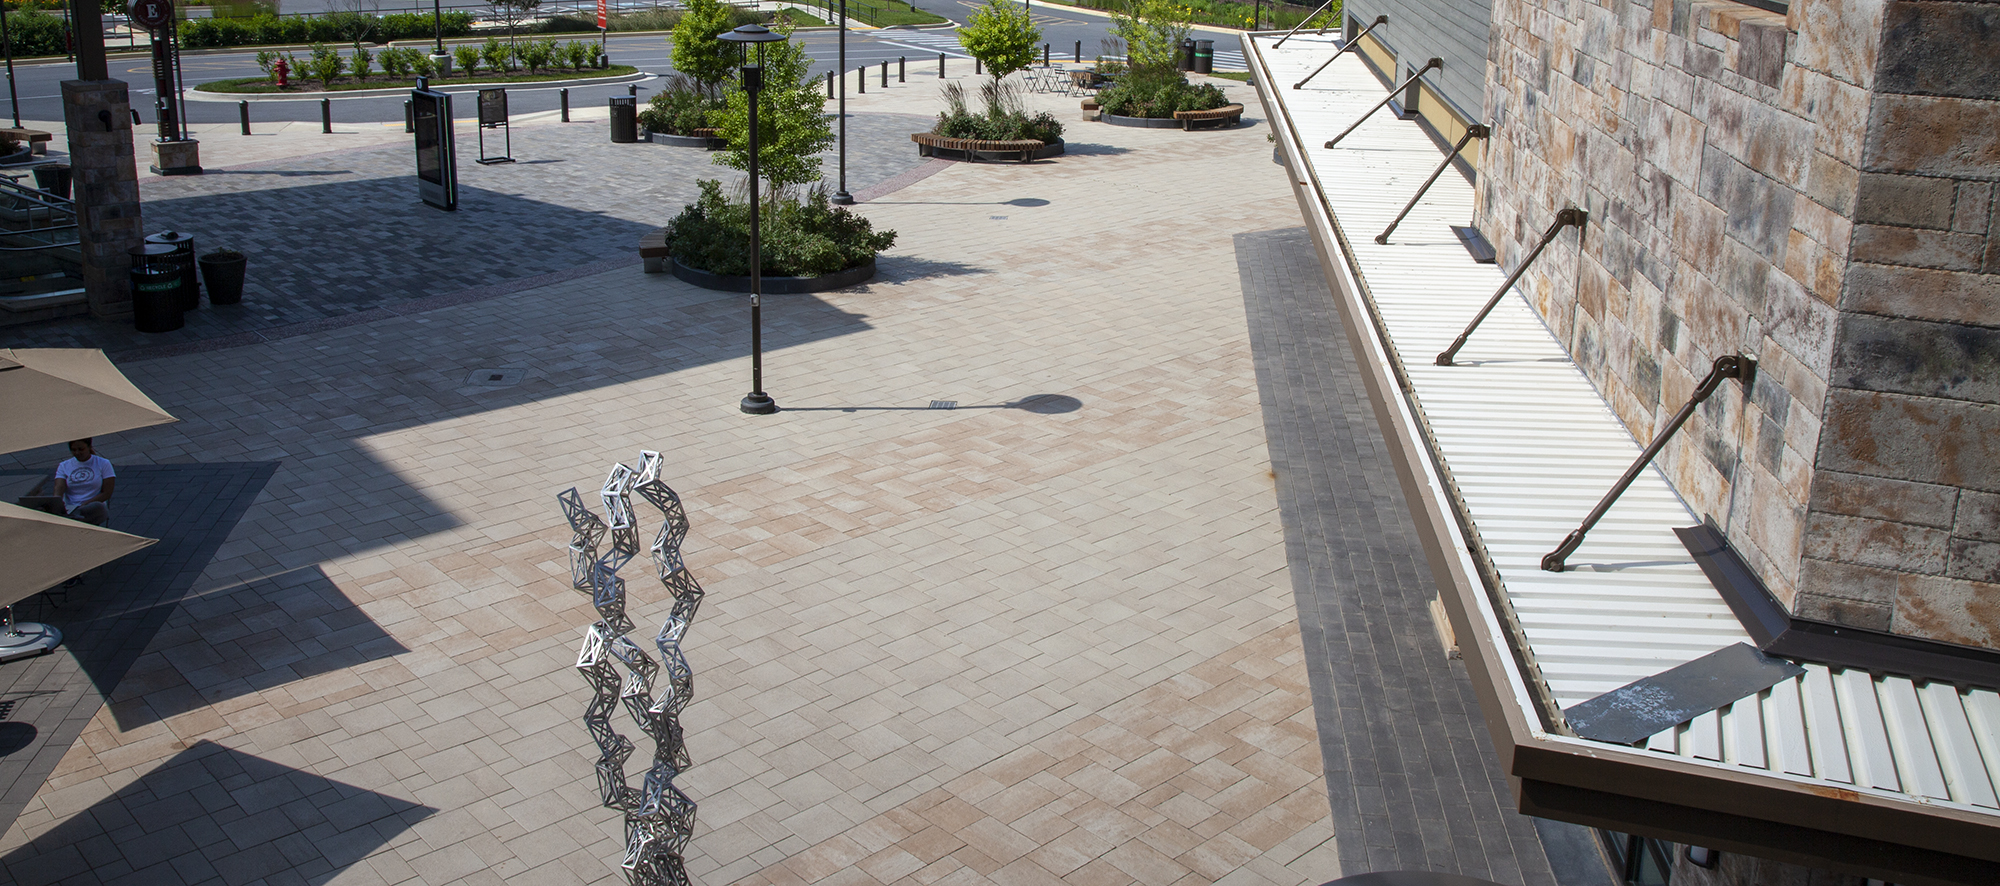 Bristol Valley in beige and tan hues are laid on a 45 degree angle, leading toward storefronts in this expansive outdoor plaza.